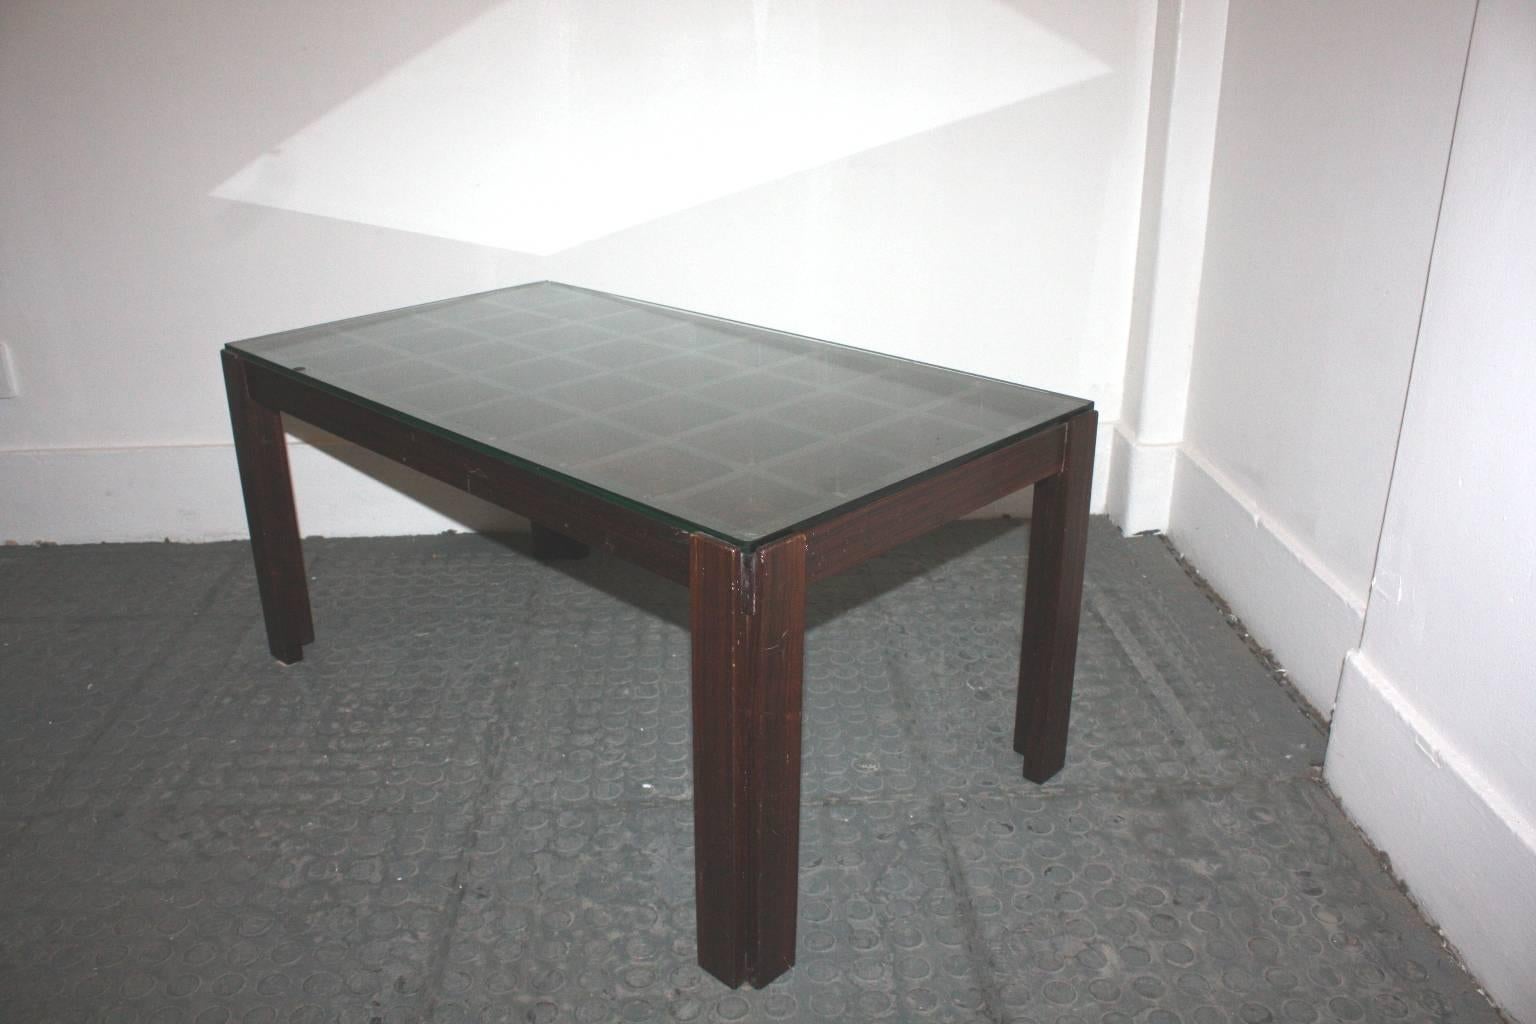 1940s Italian coffee table with  square holes and glass top.